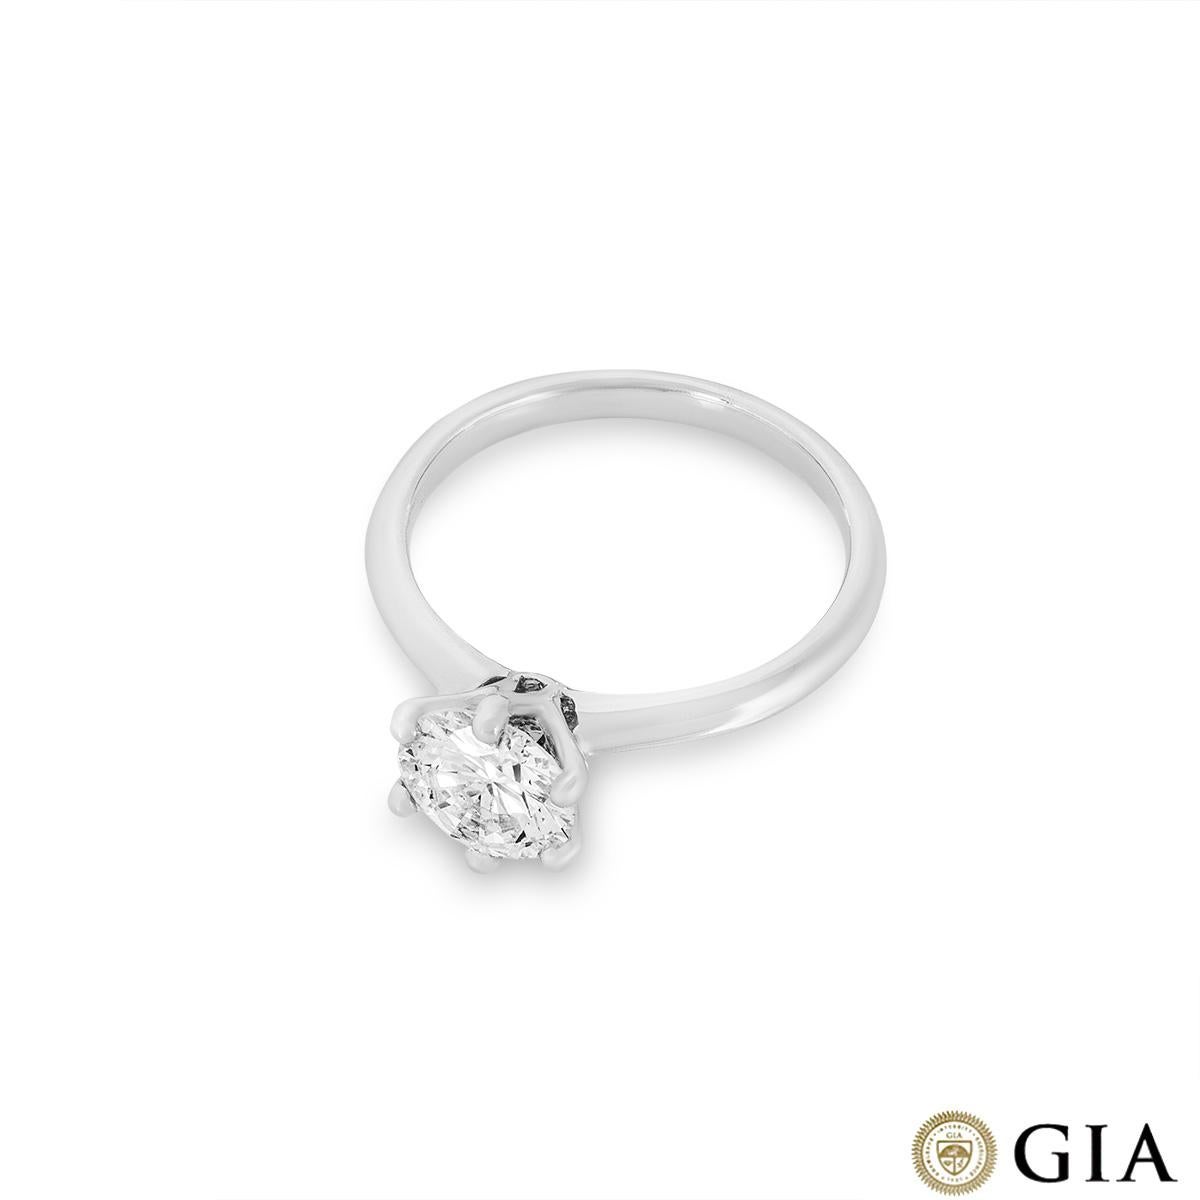 GIA Certified White Gold Round Brilliant Cut Diamond Ring 1.34ct I/VS1 In New Condition For Sale In London, GB